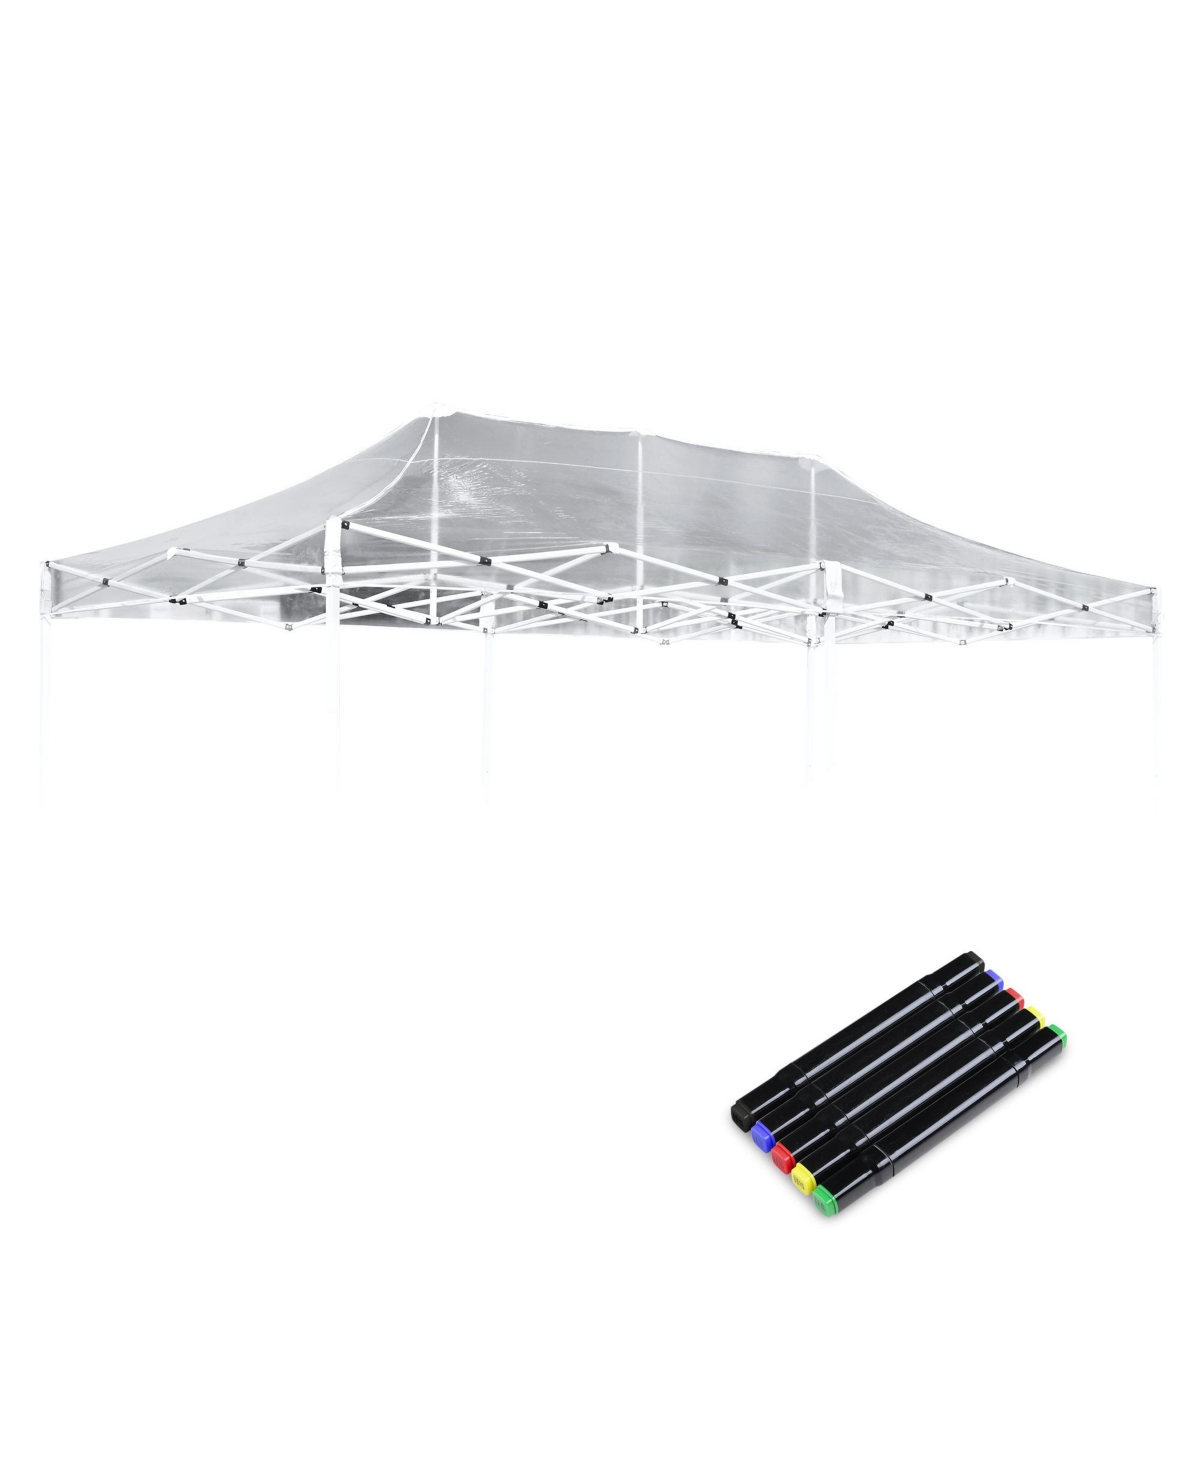 10x20Ft Pop Up Canopy Replacement Top Transparent Instant Tent Cover - White